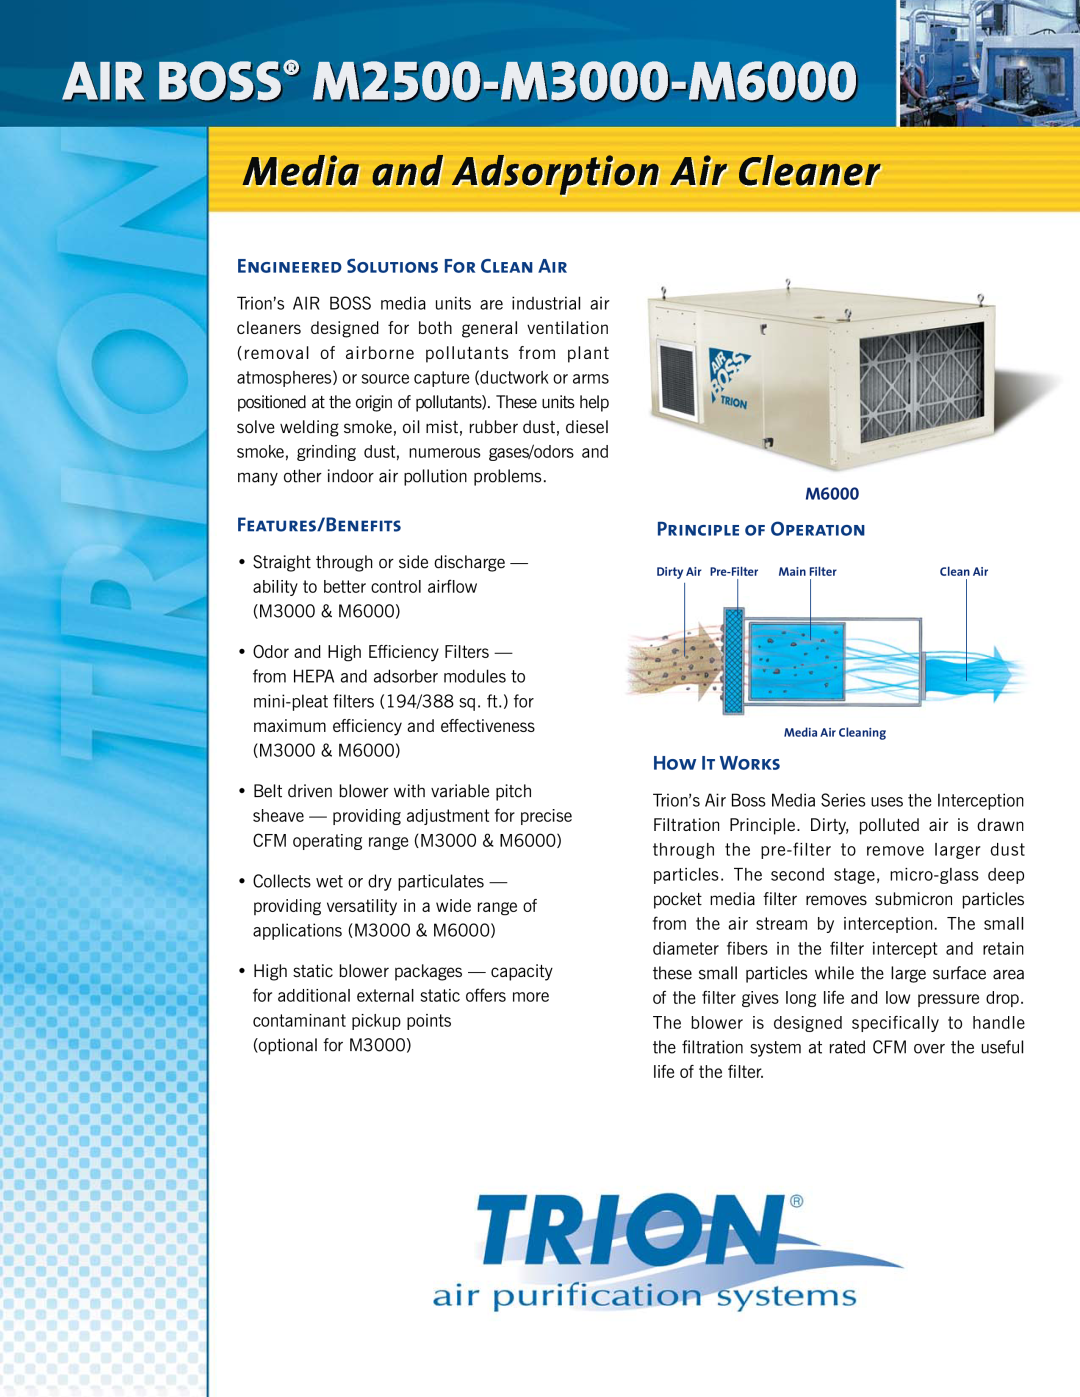 Trion M6000, M3000 manual Engineered Solutions For Clean Air, Features/Benefits, Principle of Operation, How It Works 